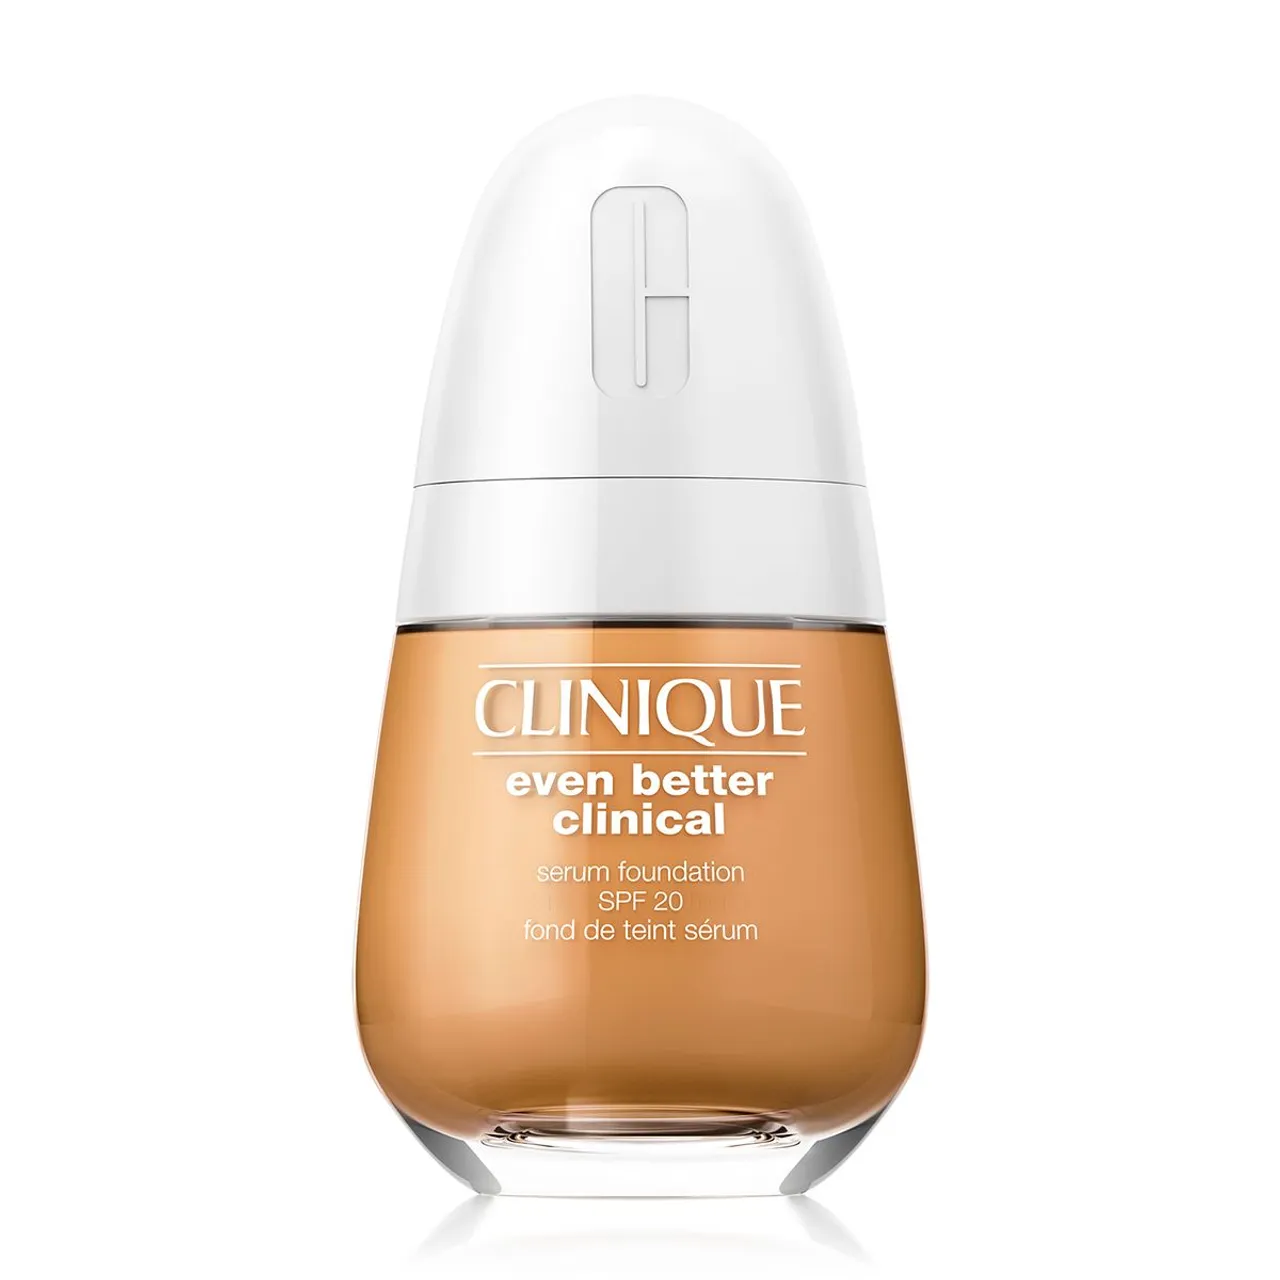 Clinique Even Better Clinical Serum Foundation Spf20 30Ml Wn112 Ginger